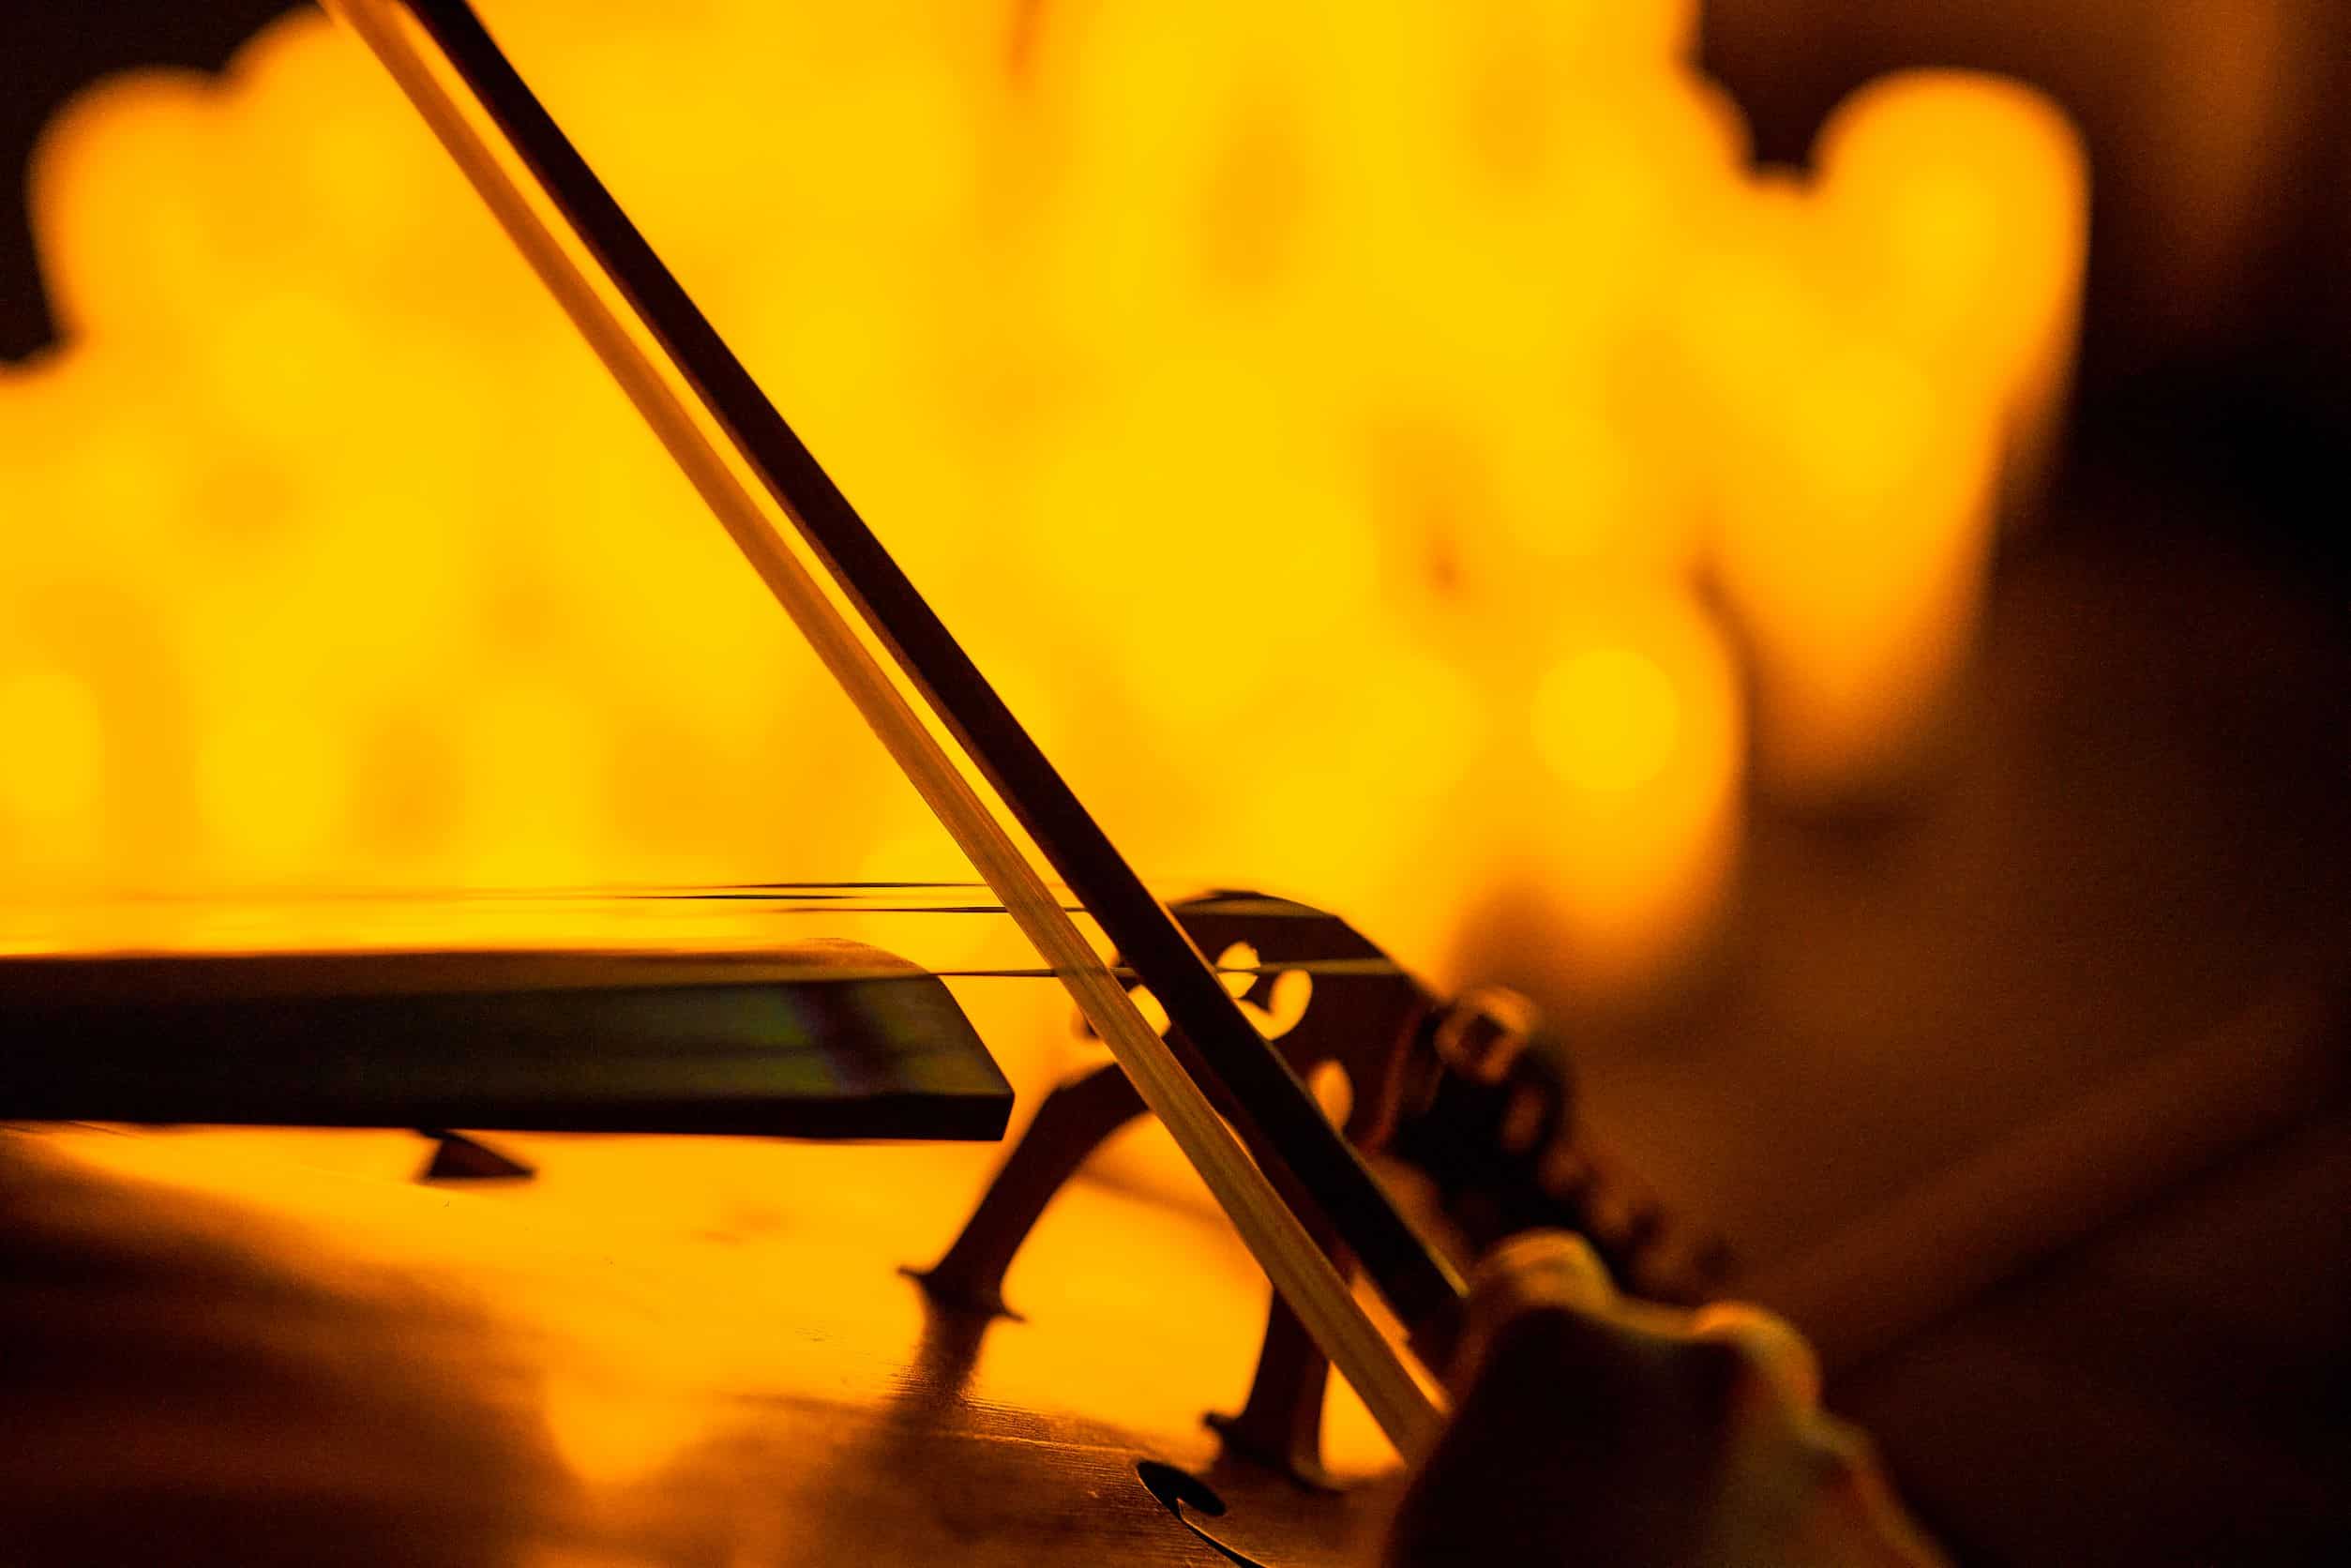 A close-up of a bow being used to play a string instrument with the blurred image of candles in the background.